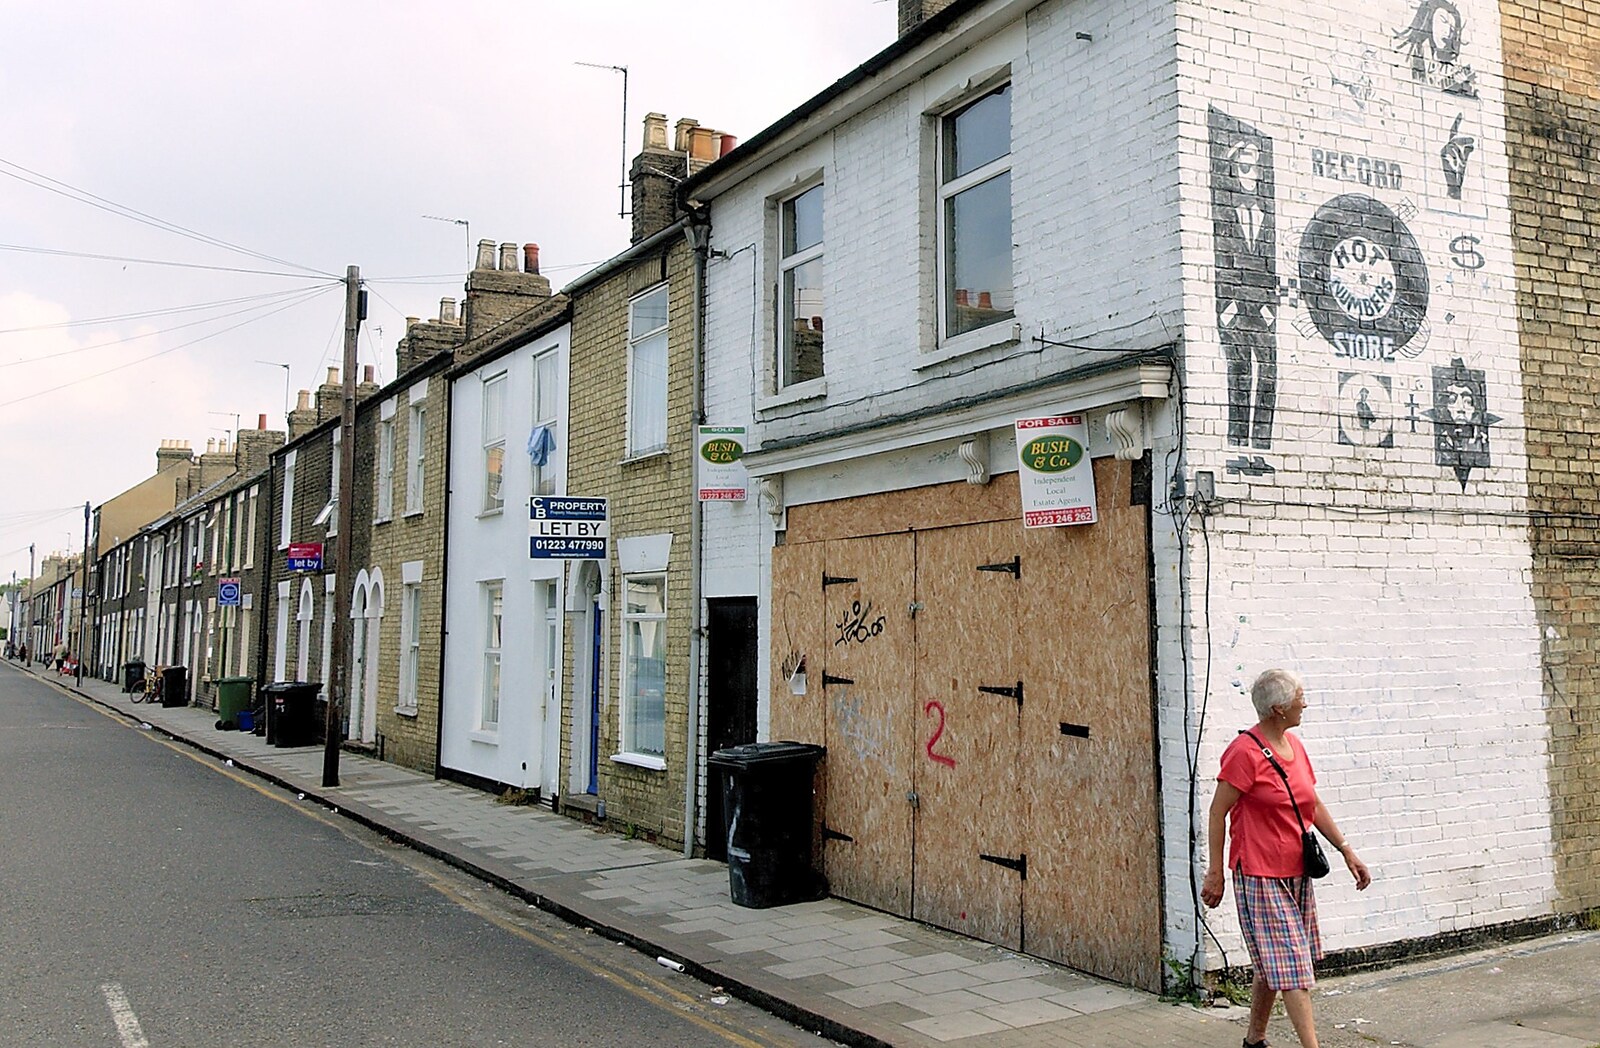 The boarded-up Hot Numbers record shop from Ben Leaves "The Lab", Fort St. George, Cambridge - 16th June 2006